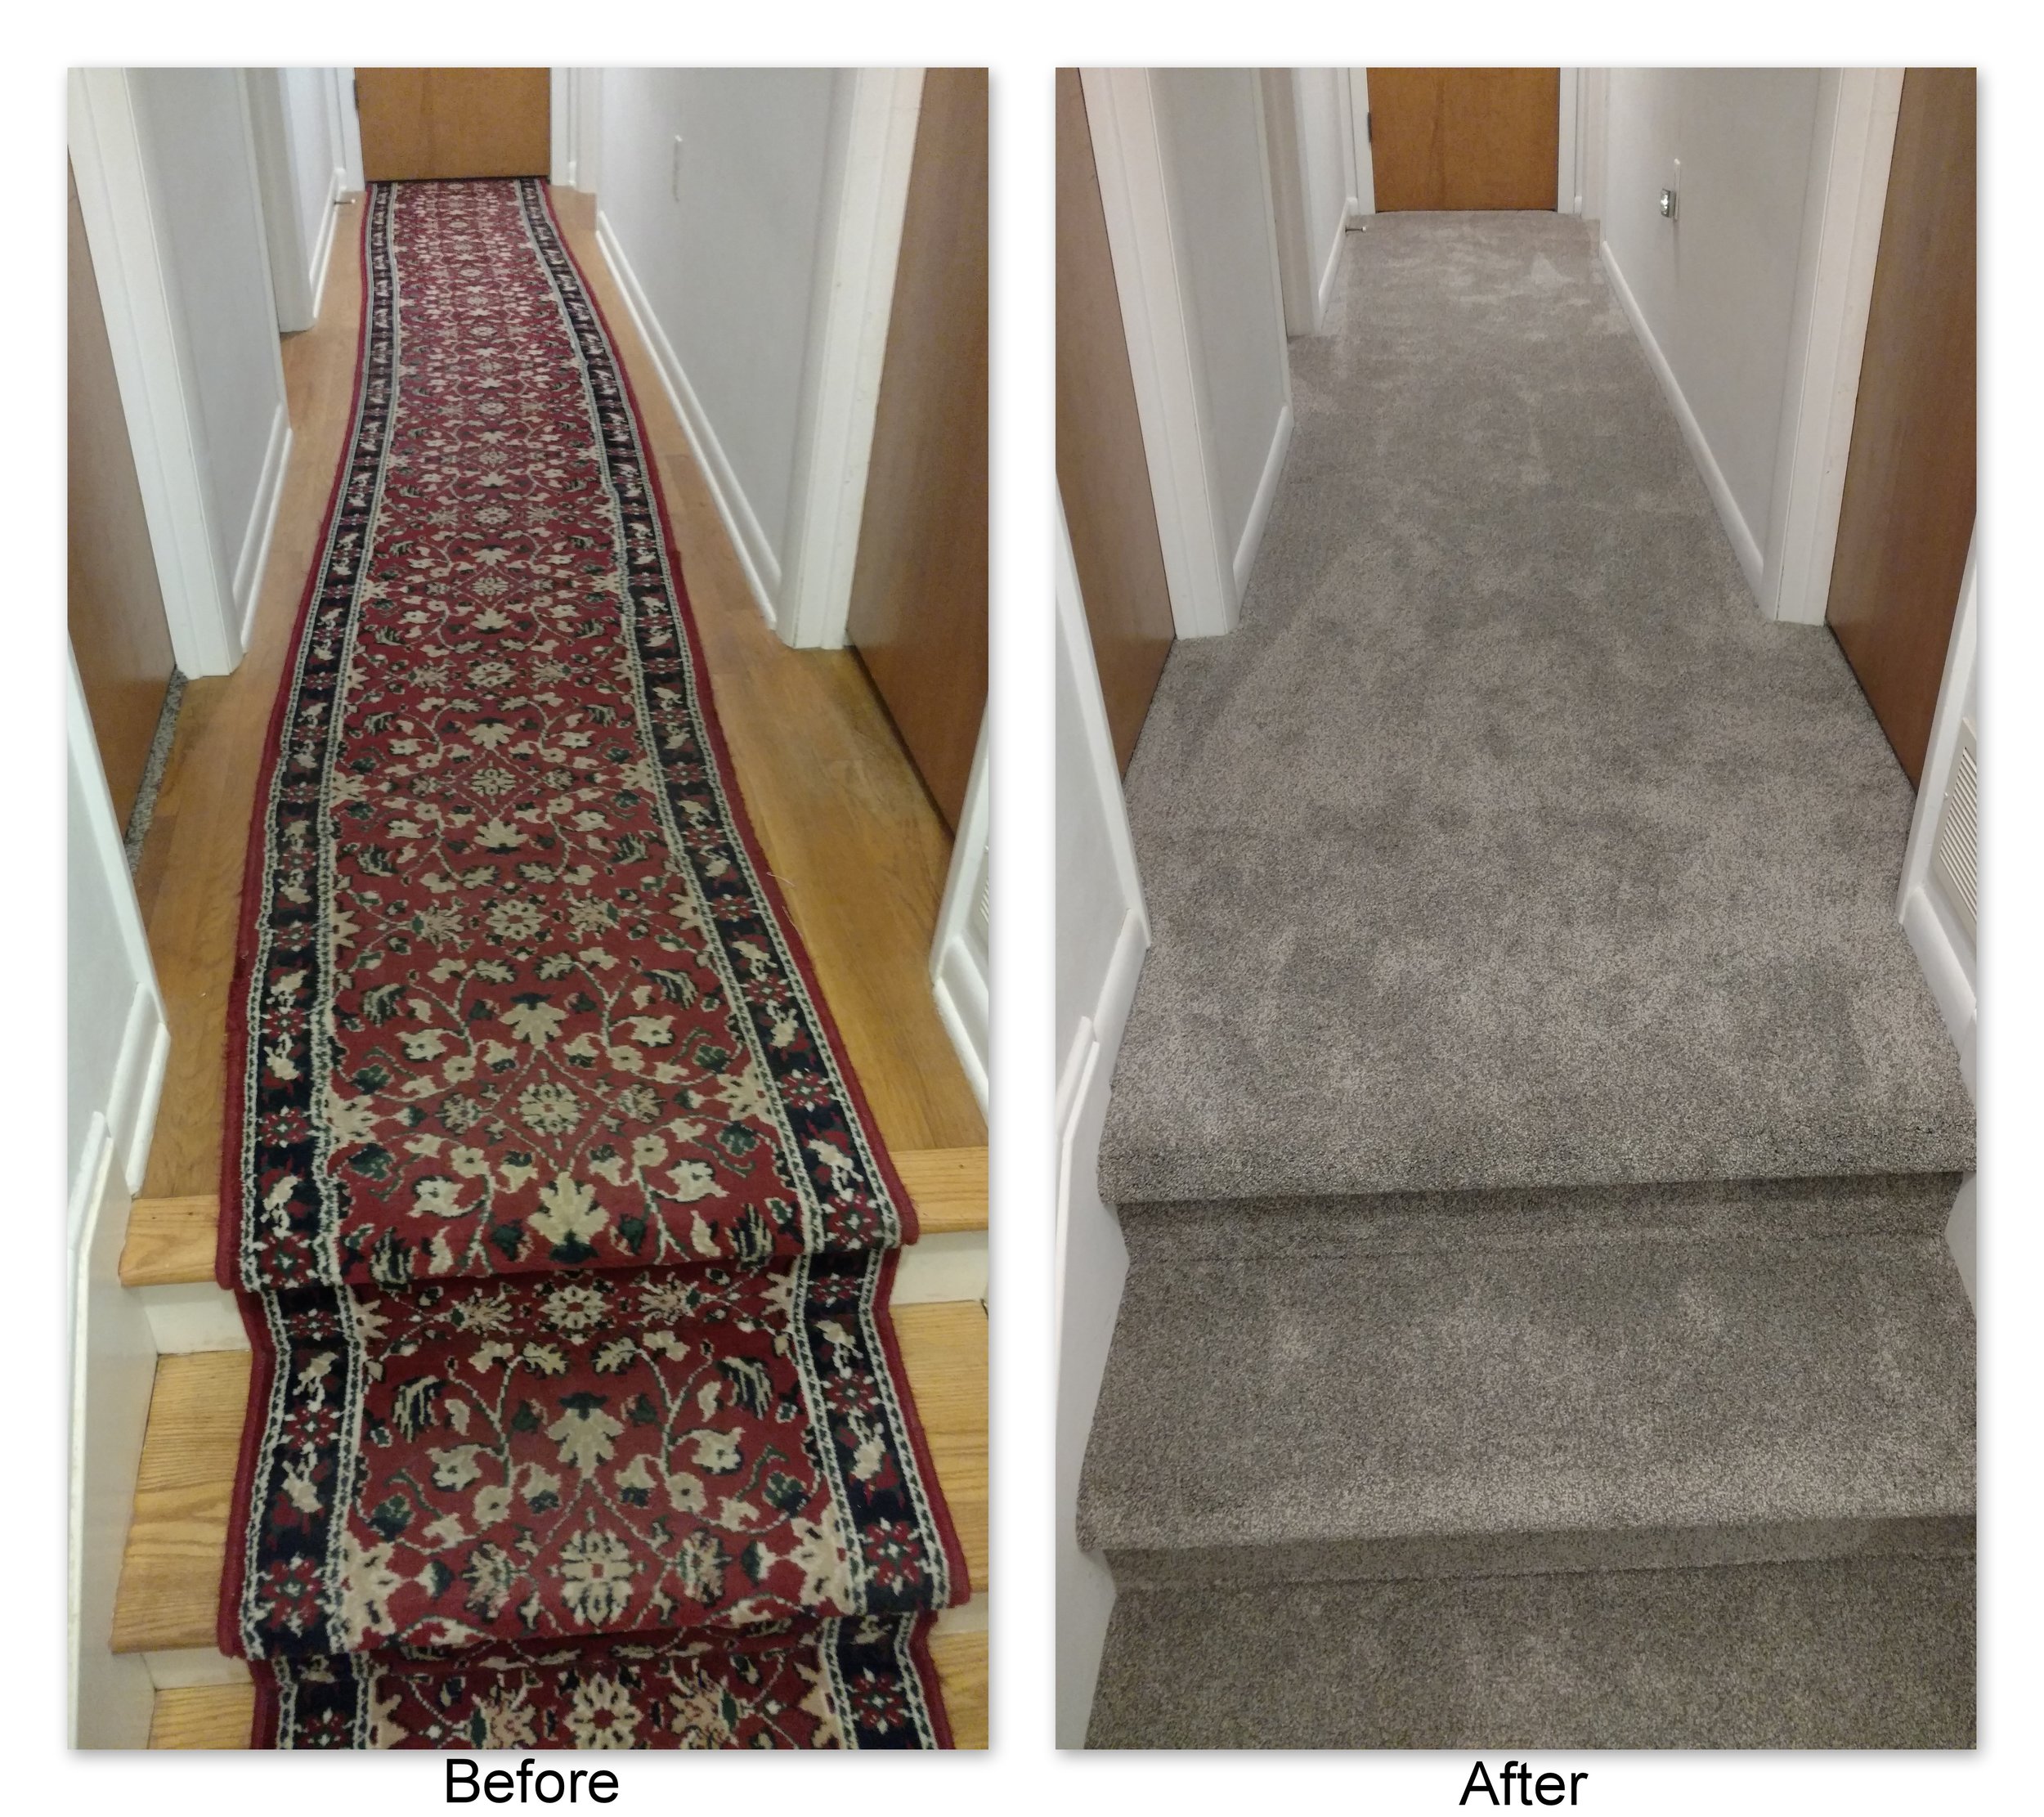 From crooked old runner to classy grey multiflec, Frank &amp; Tonya's carpet choice of Tigressa SoftStyle Sakti Carpet in the color Sundial drastically updated their hall to a modern look.